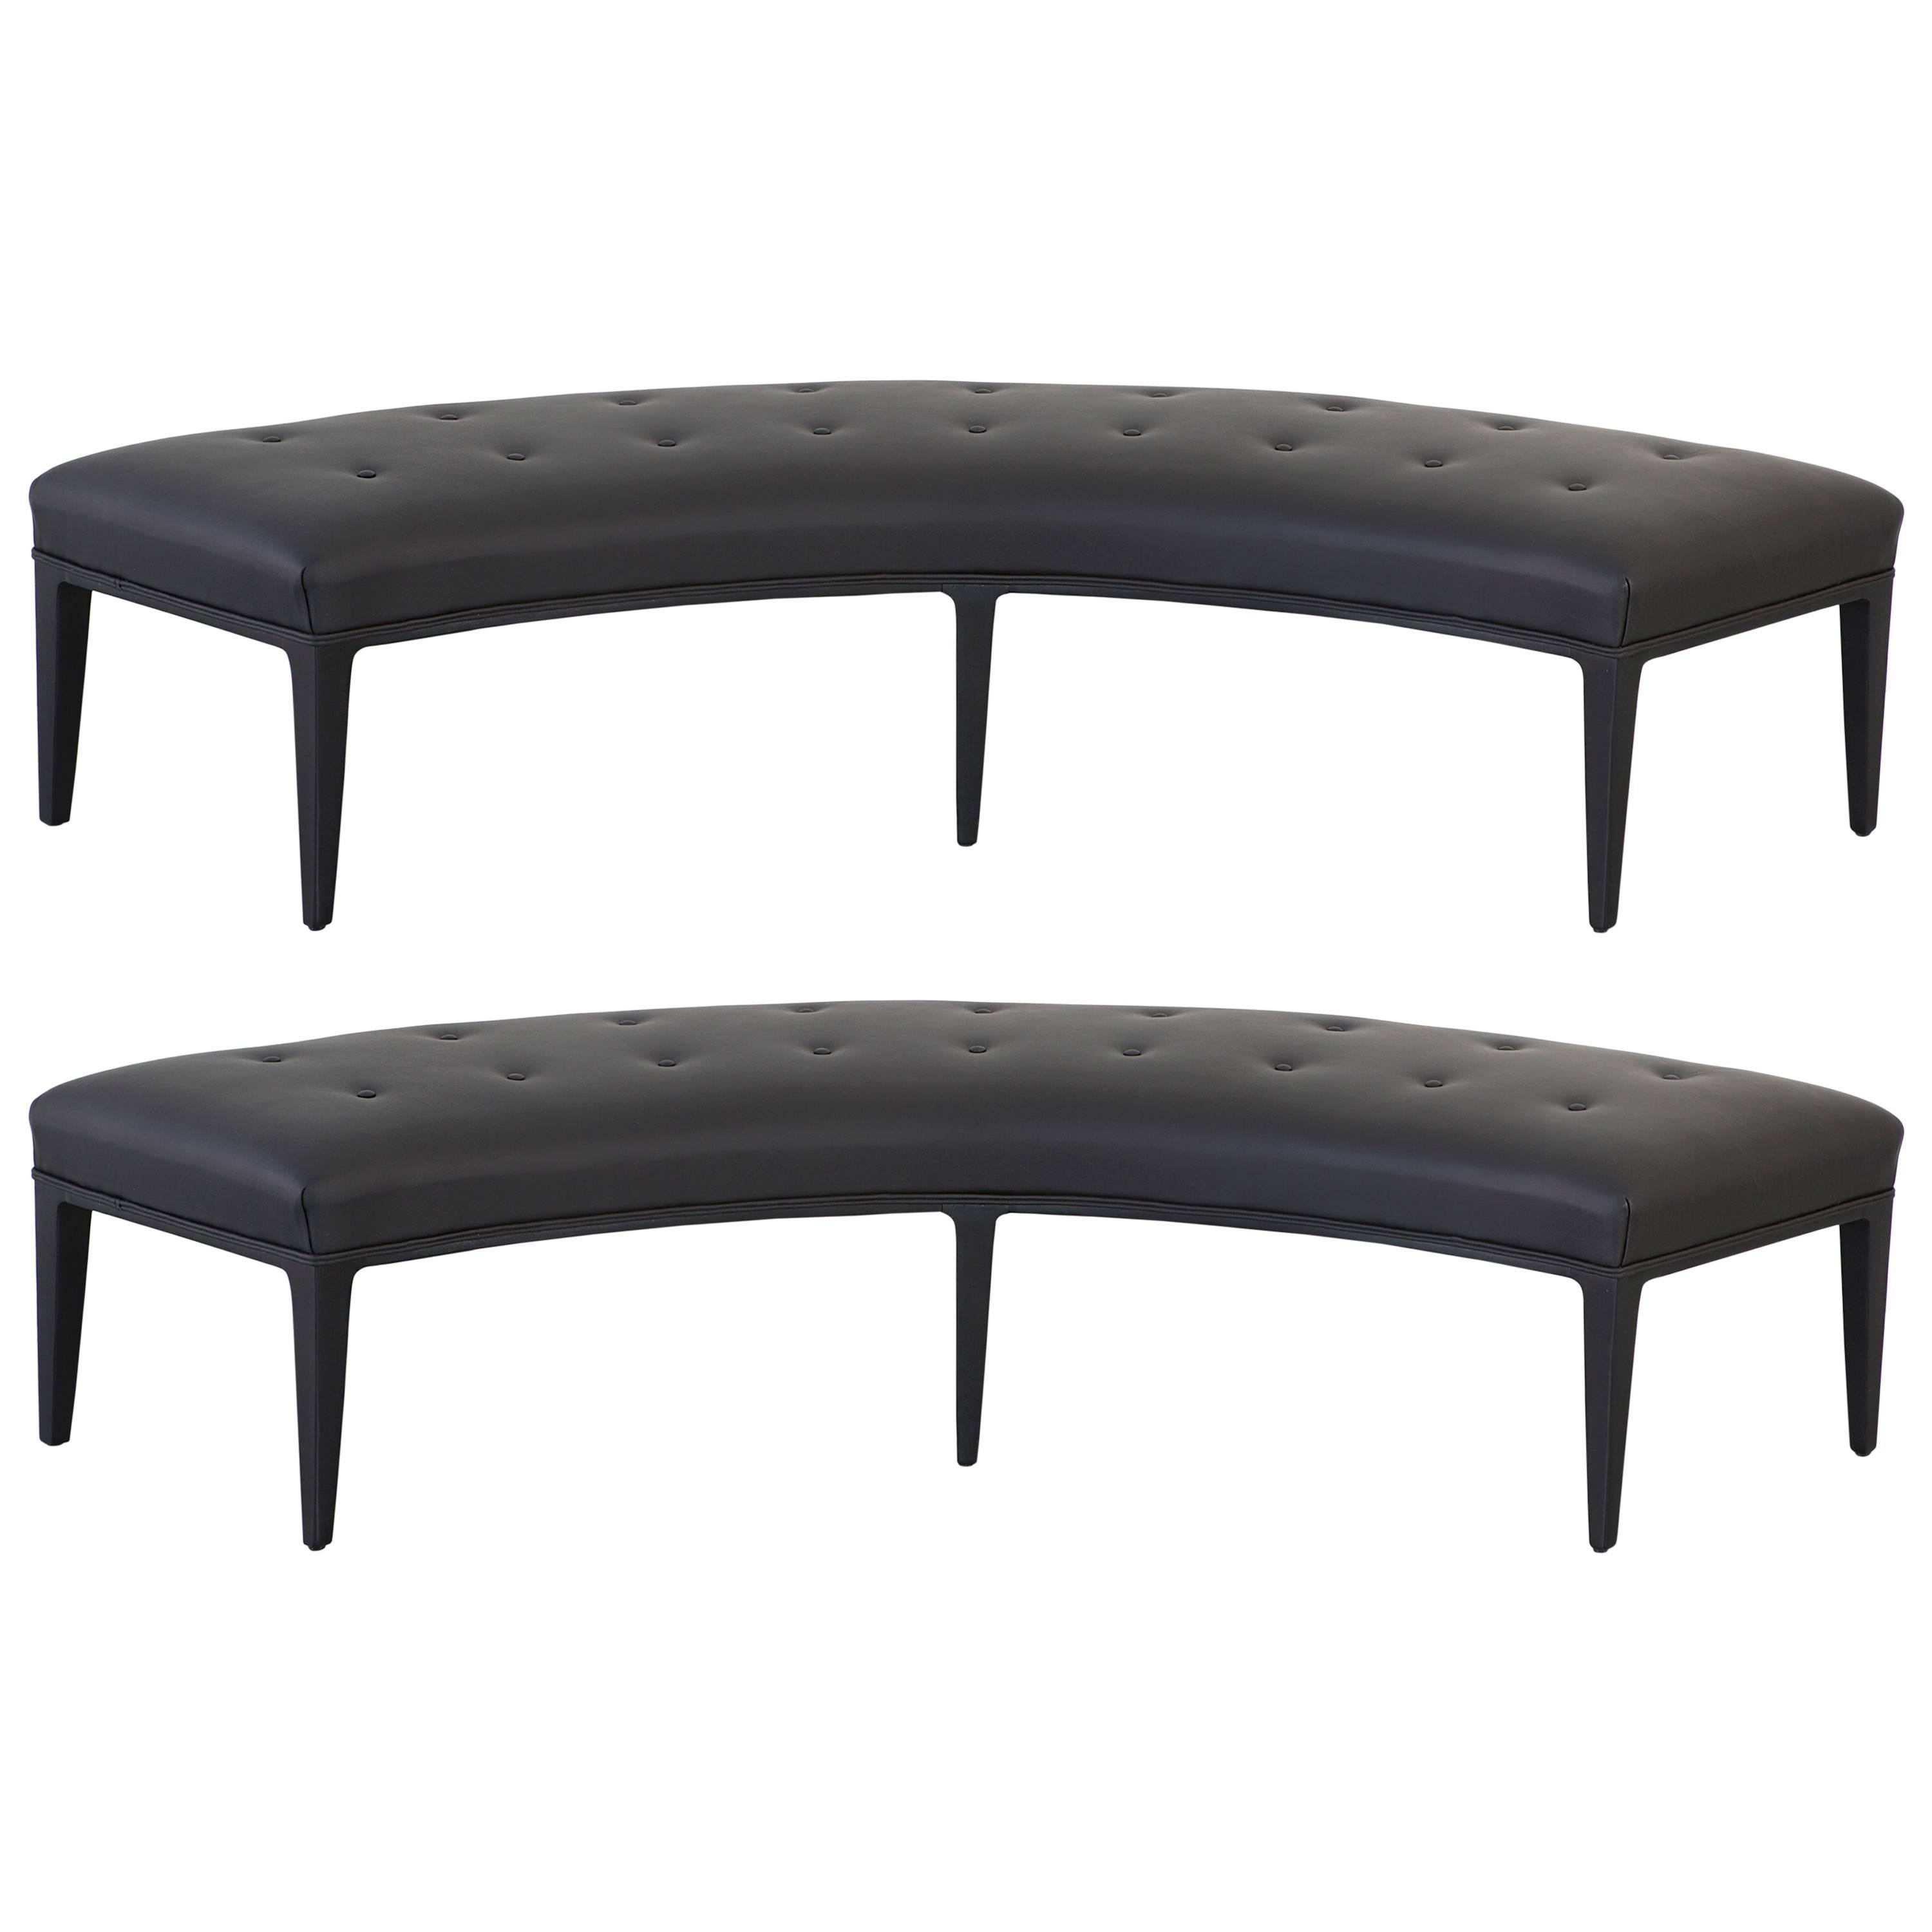 Pair of Benches Attributed to Harvey Probber